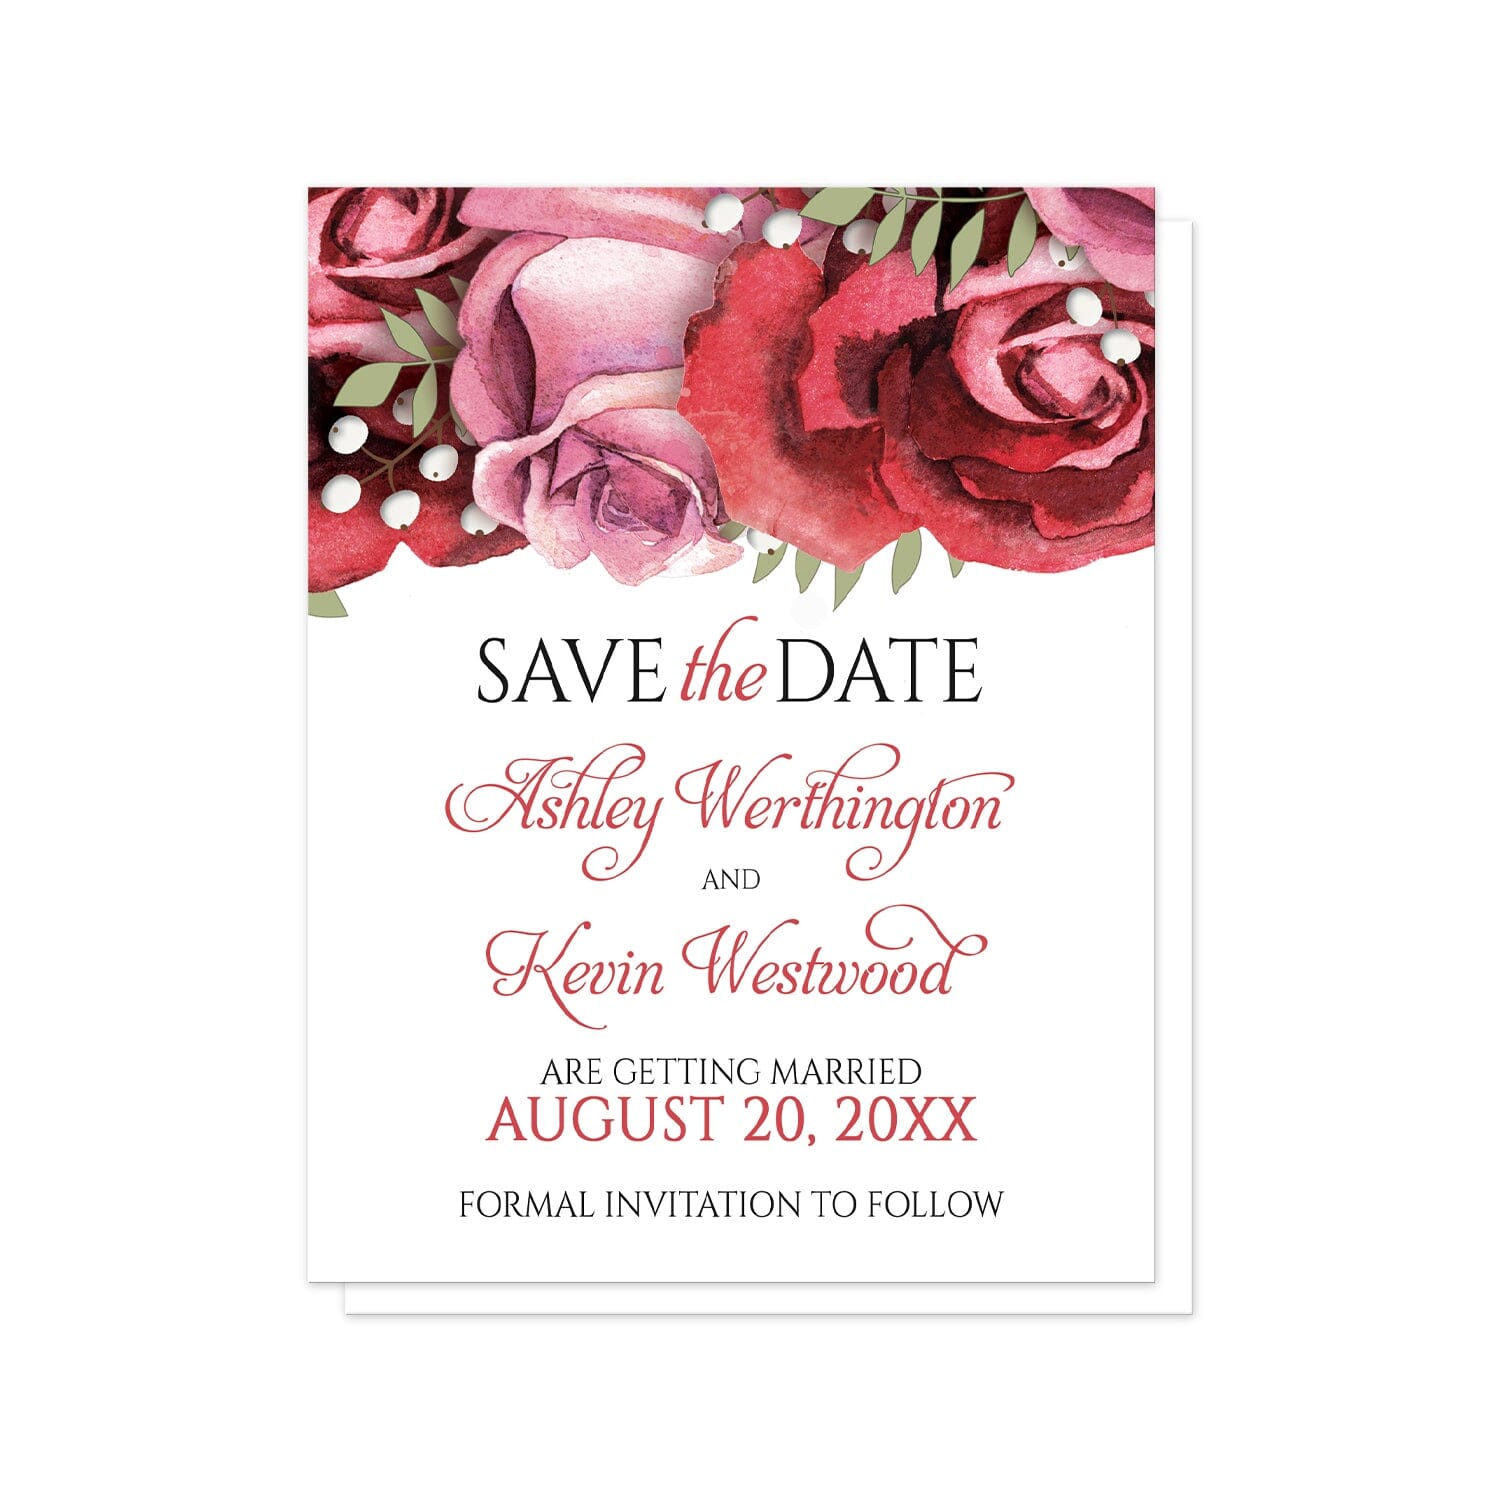 Burgundy Red Pink Rose Save the Date Cards at Artistically Invited. Beautiful burgundy red pink rose save the date cards with beautiful burgundy red and pink roses along the top over a white background. Your personalized wedding date details are custom printed in black and red below the pretty roses. 